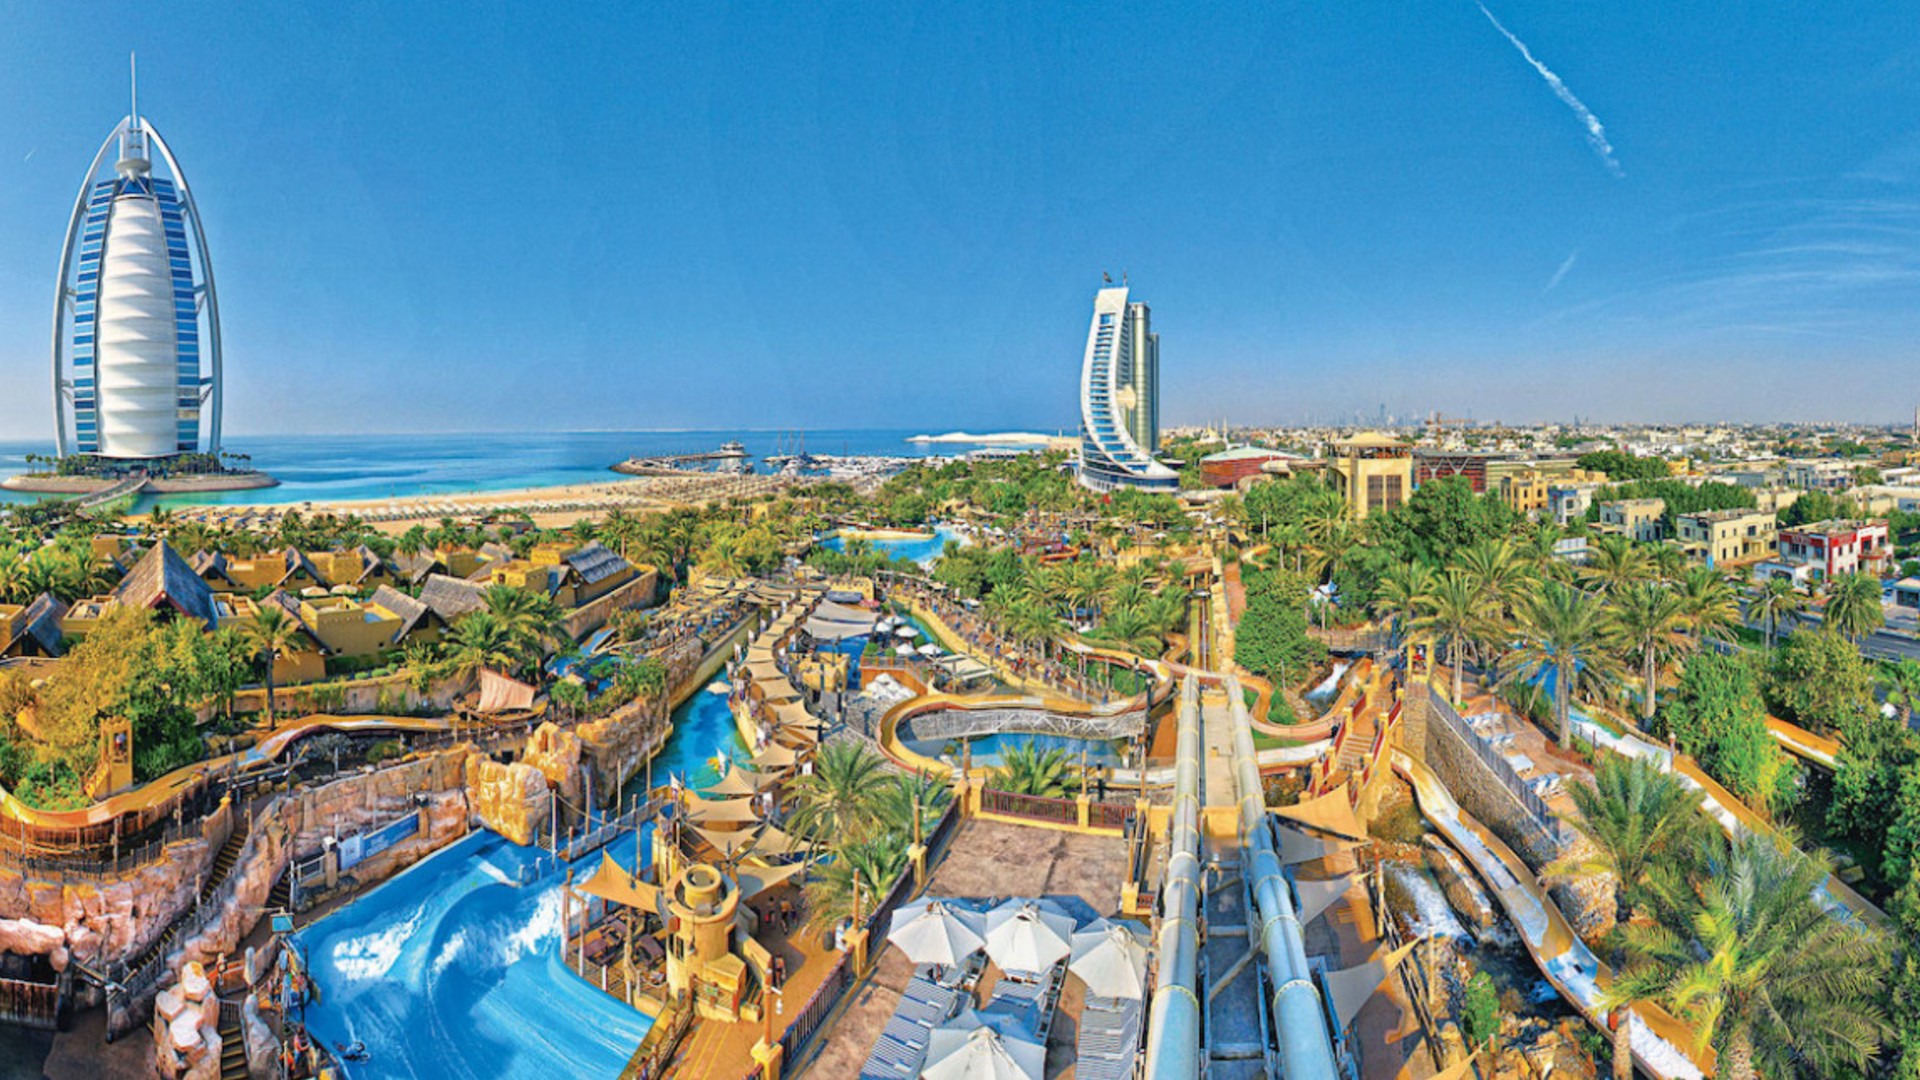 Wadi Waterpark Is Offer A Limited Time Offer With Tickets For AED 99